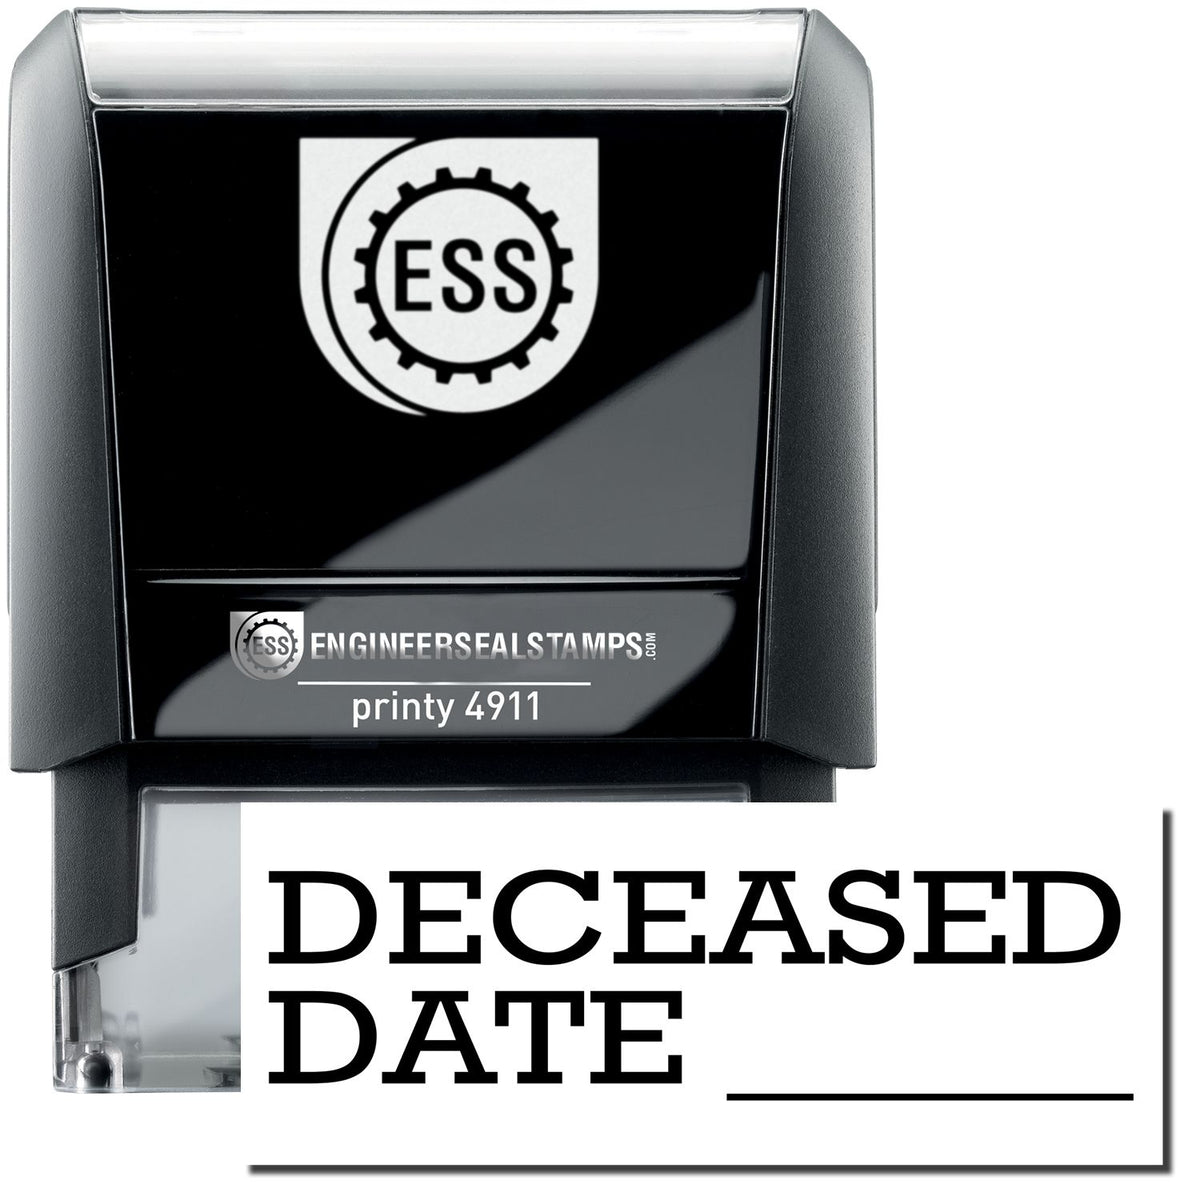 A self-inking stamp with a stamped image showing how the text &quot;DECEASED DATE&quot; with a line is displayed after stamping.